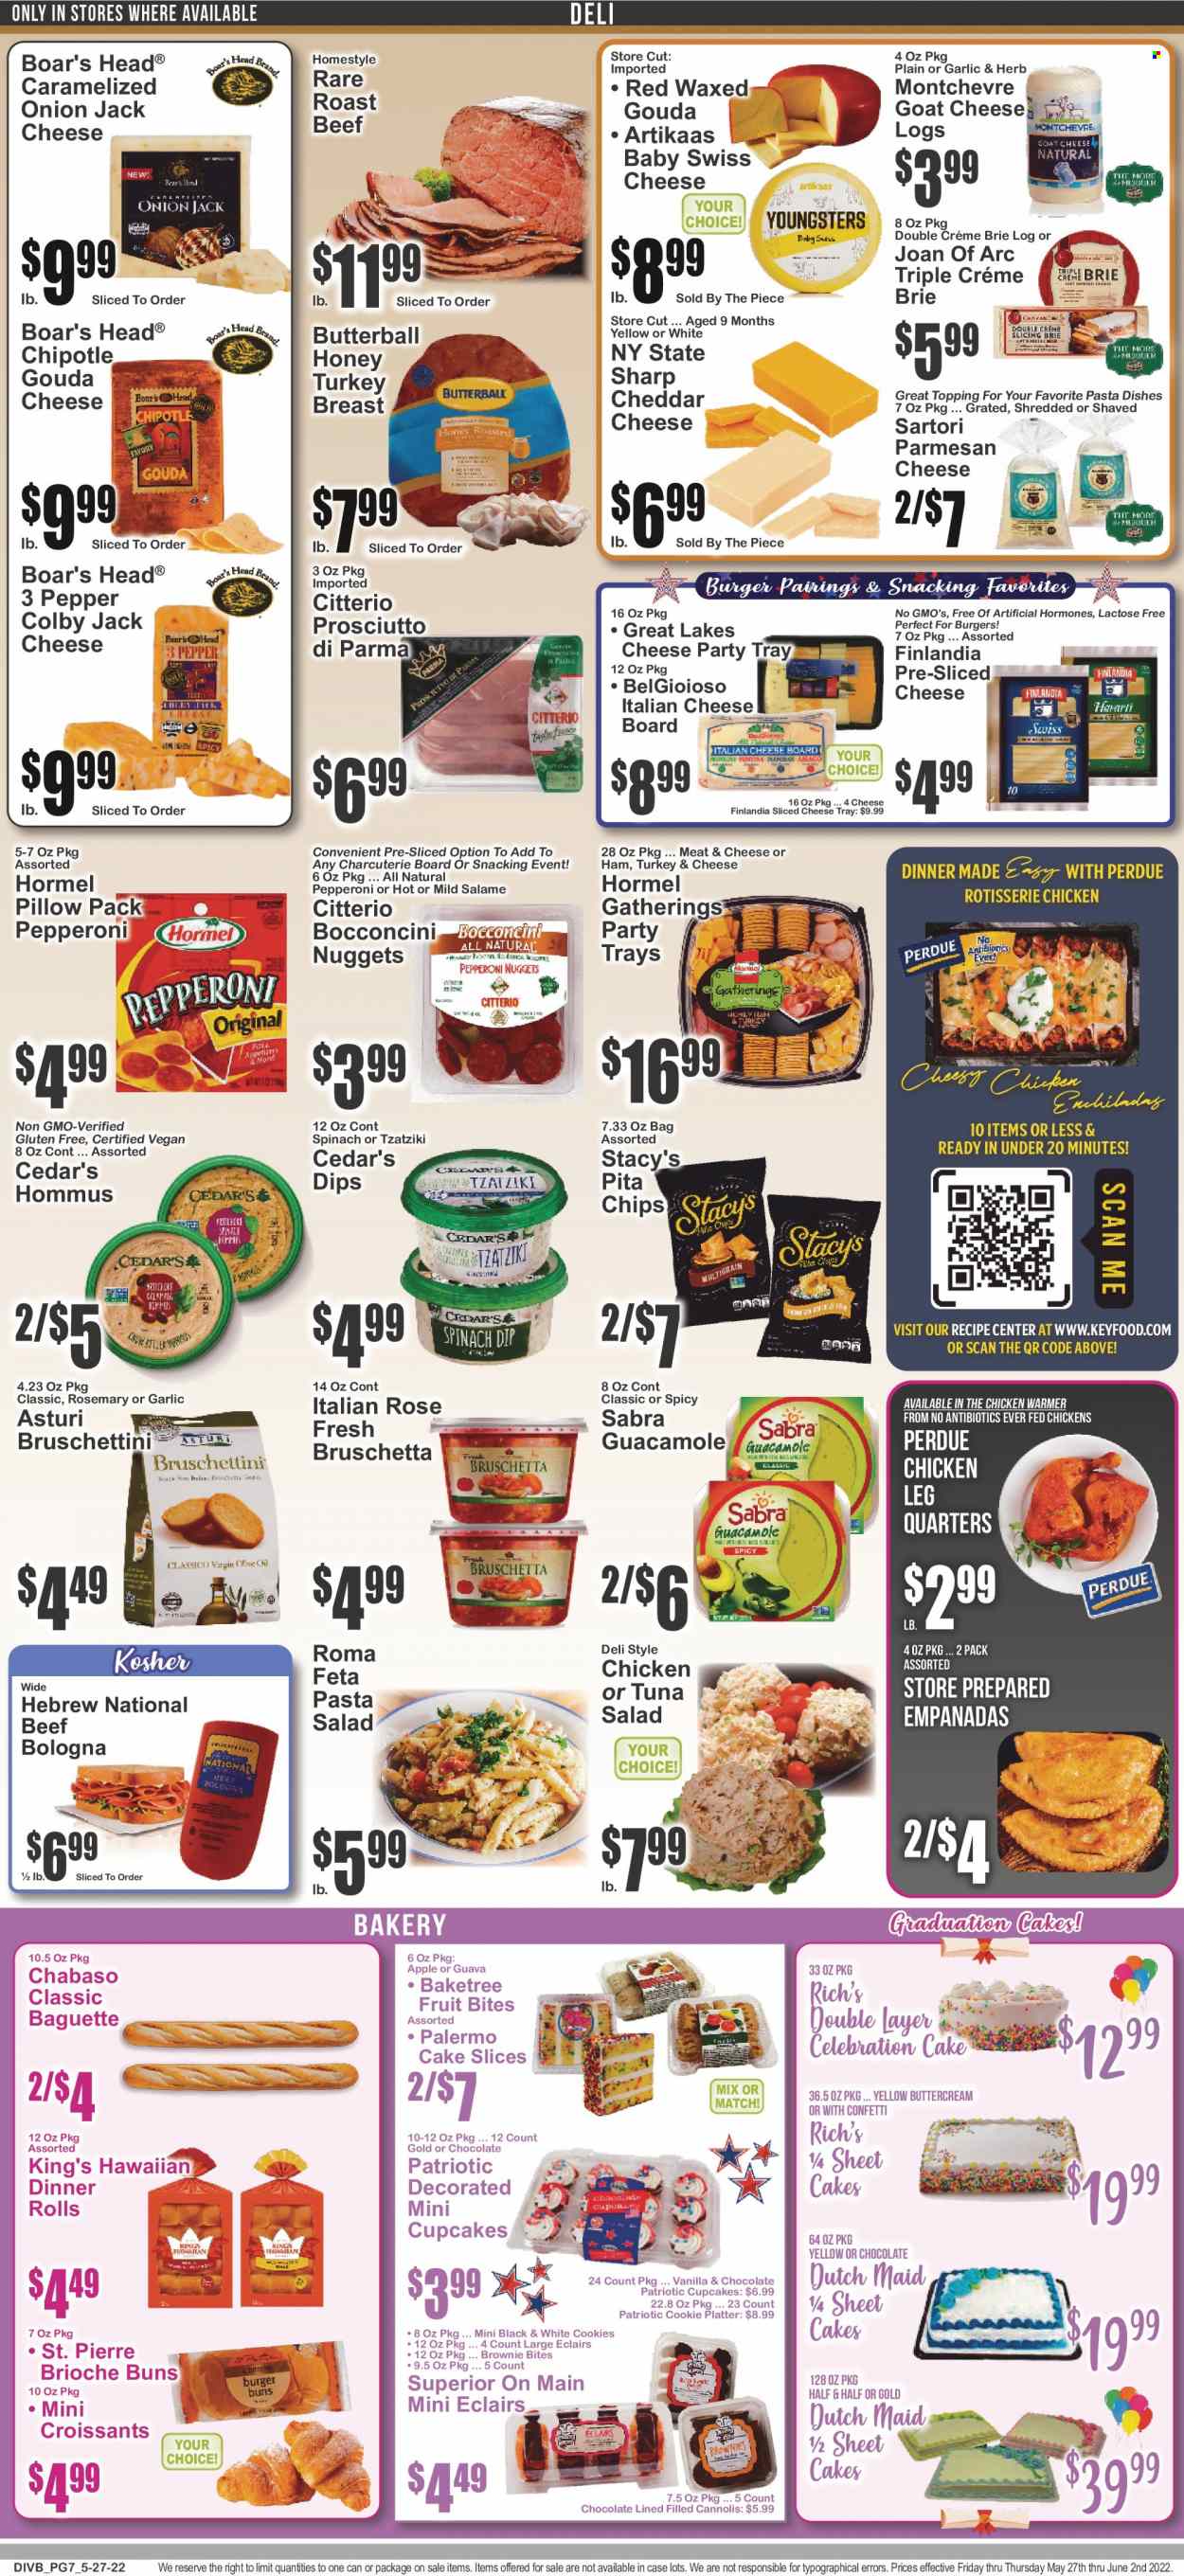 thumbnail - Super Fresh Flyer - 05/27/2022 - 06/02/2022 - Sales products - baguette, cake, dinner rolls, croissant, buns, brioche, cupcake, brownies, onion, guava, tuna, enchiladas, chicken enchiladas, chicken roast, nuggets, hamburger, pasta, Perdue®, pasta sides, Hormel, bruschetta, Butterball, prosciutto, bologna sausage, pepperoni, tzatziki, hummus, guacamole, tuna salad, pasta salad, bocconcini, Colby cheese, goat cheese, gouda, sliced cheese, swiss cheese, parmesan, brie, Montchevre, cookies, chocolate, Celebration, chips, pita chips, topping, rosemary, honey, wine, rosé wine, turkey breast, chicken legs, beef meat, roast beef, Half and half. Page 7.